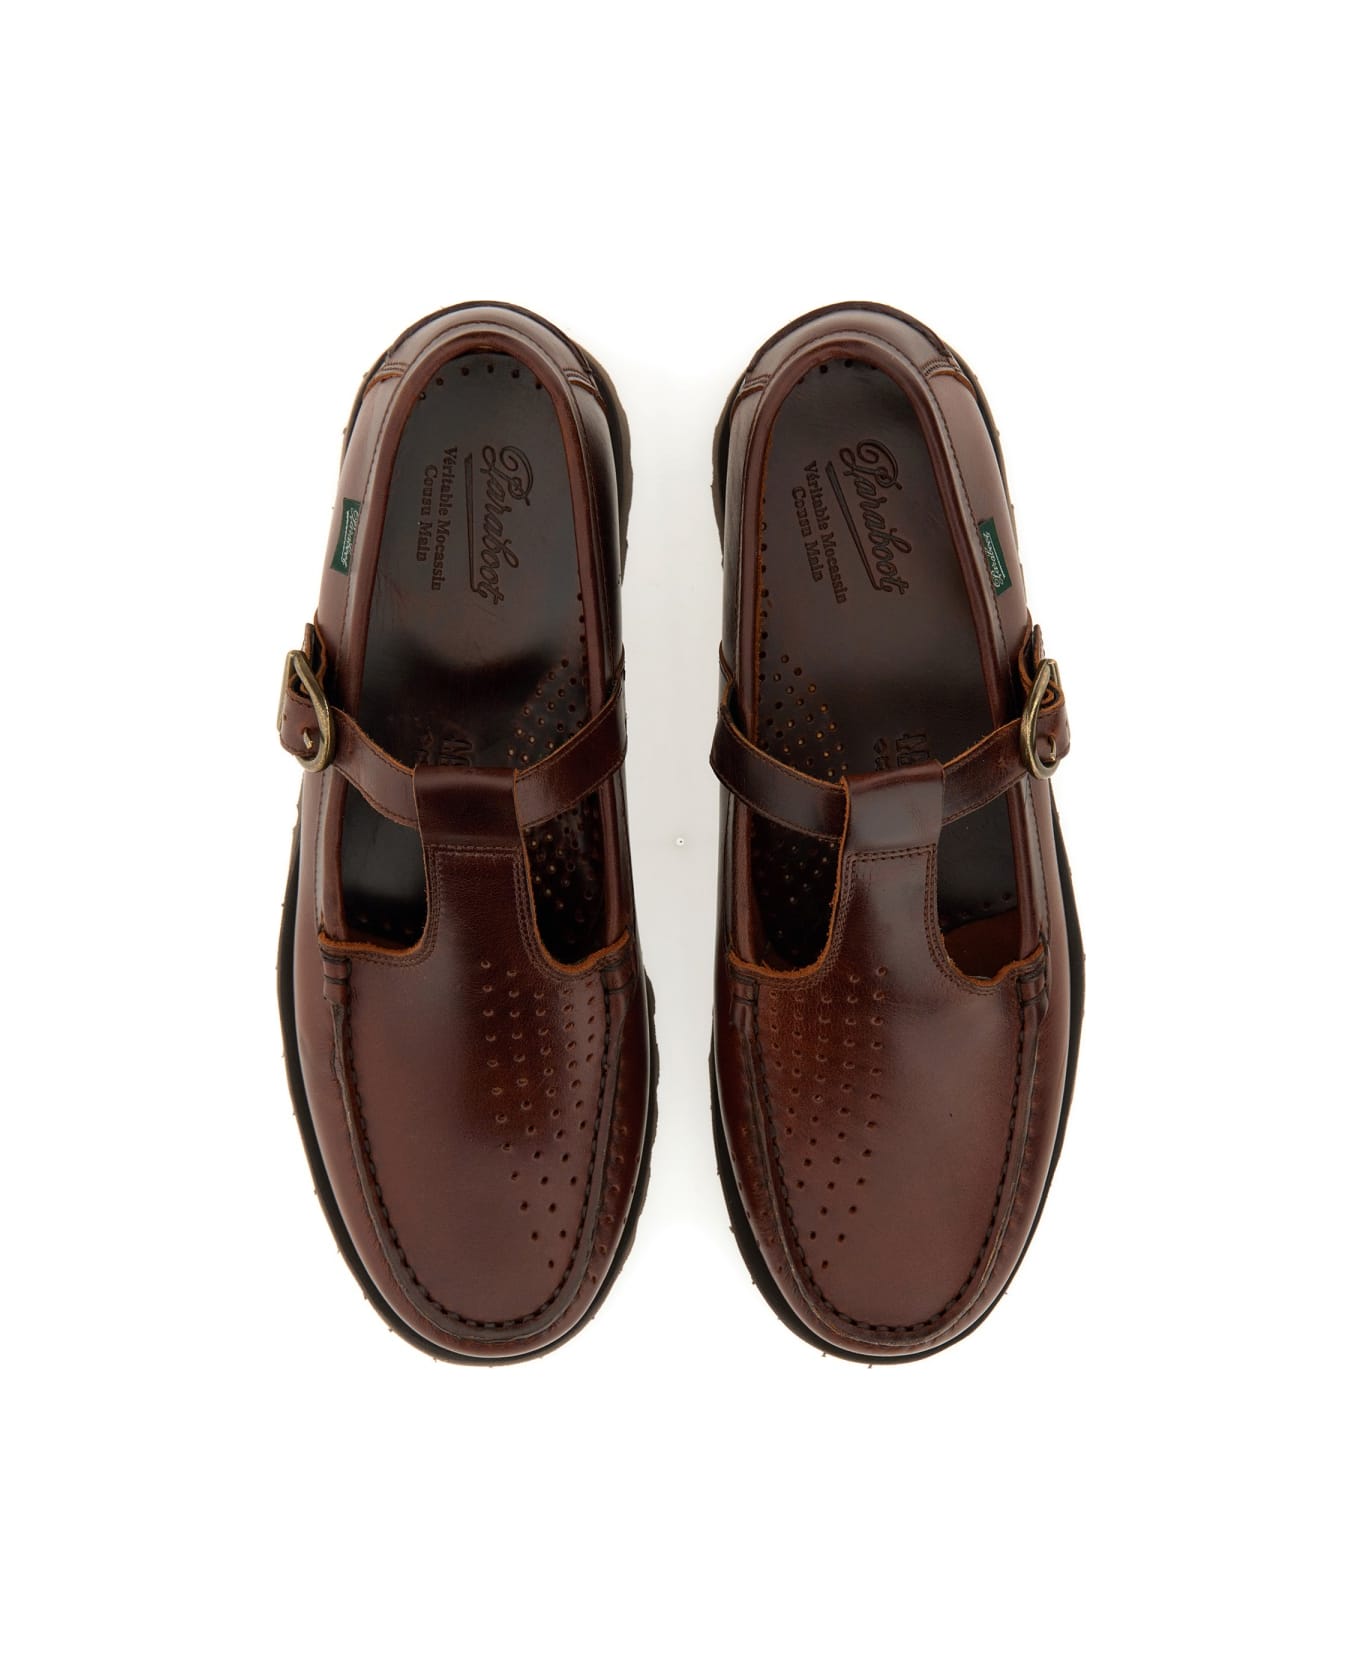 Paraboot Babord Loafer - BROWN